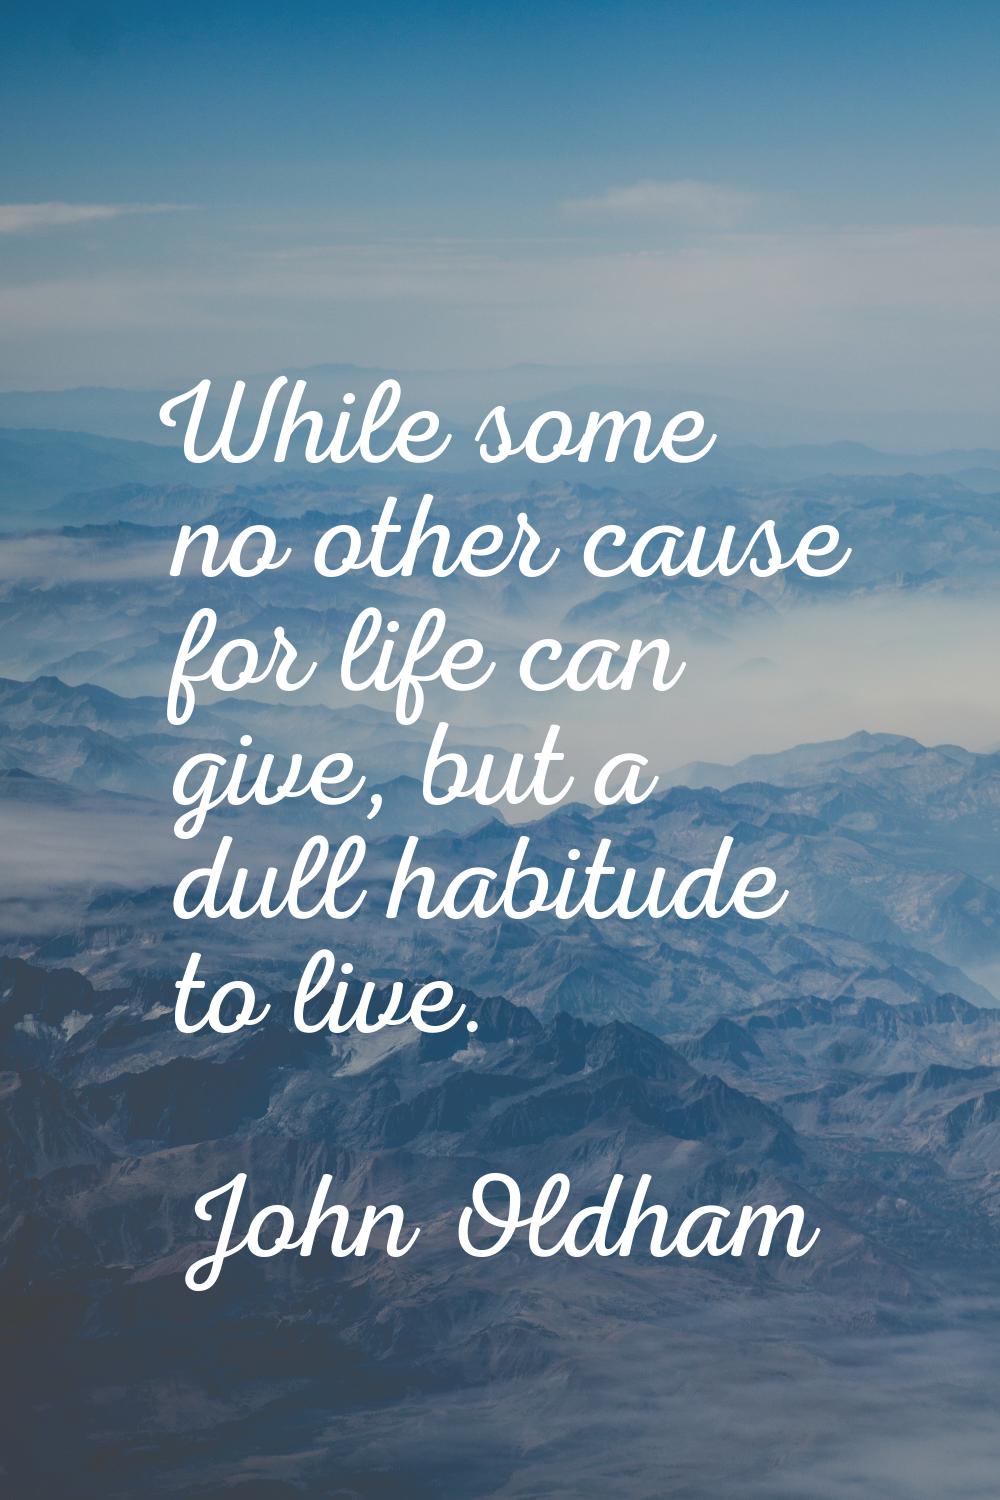 While some no other cause for life can give, but a dull habitude to live.